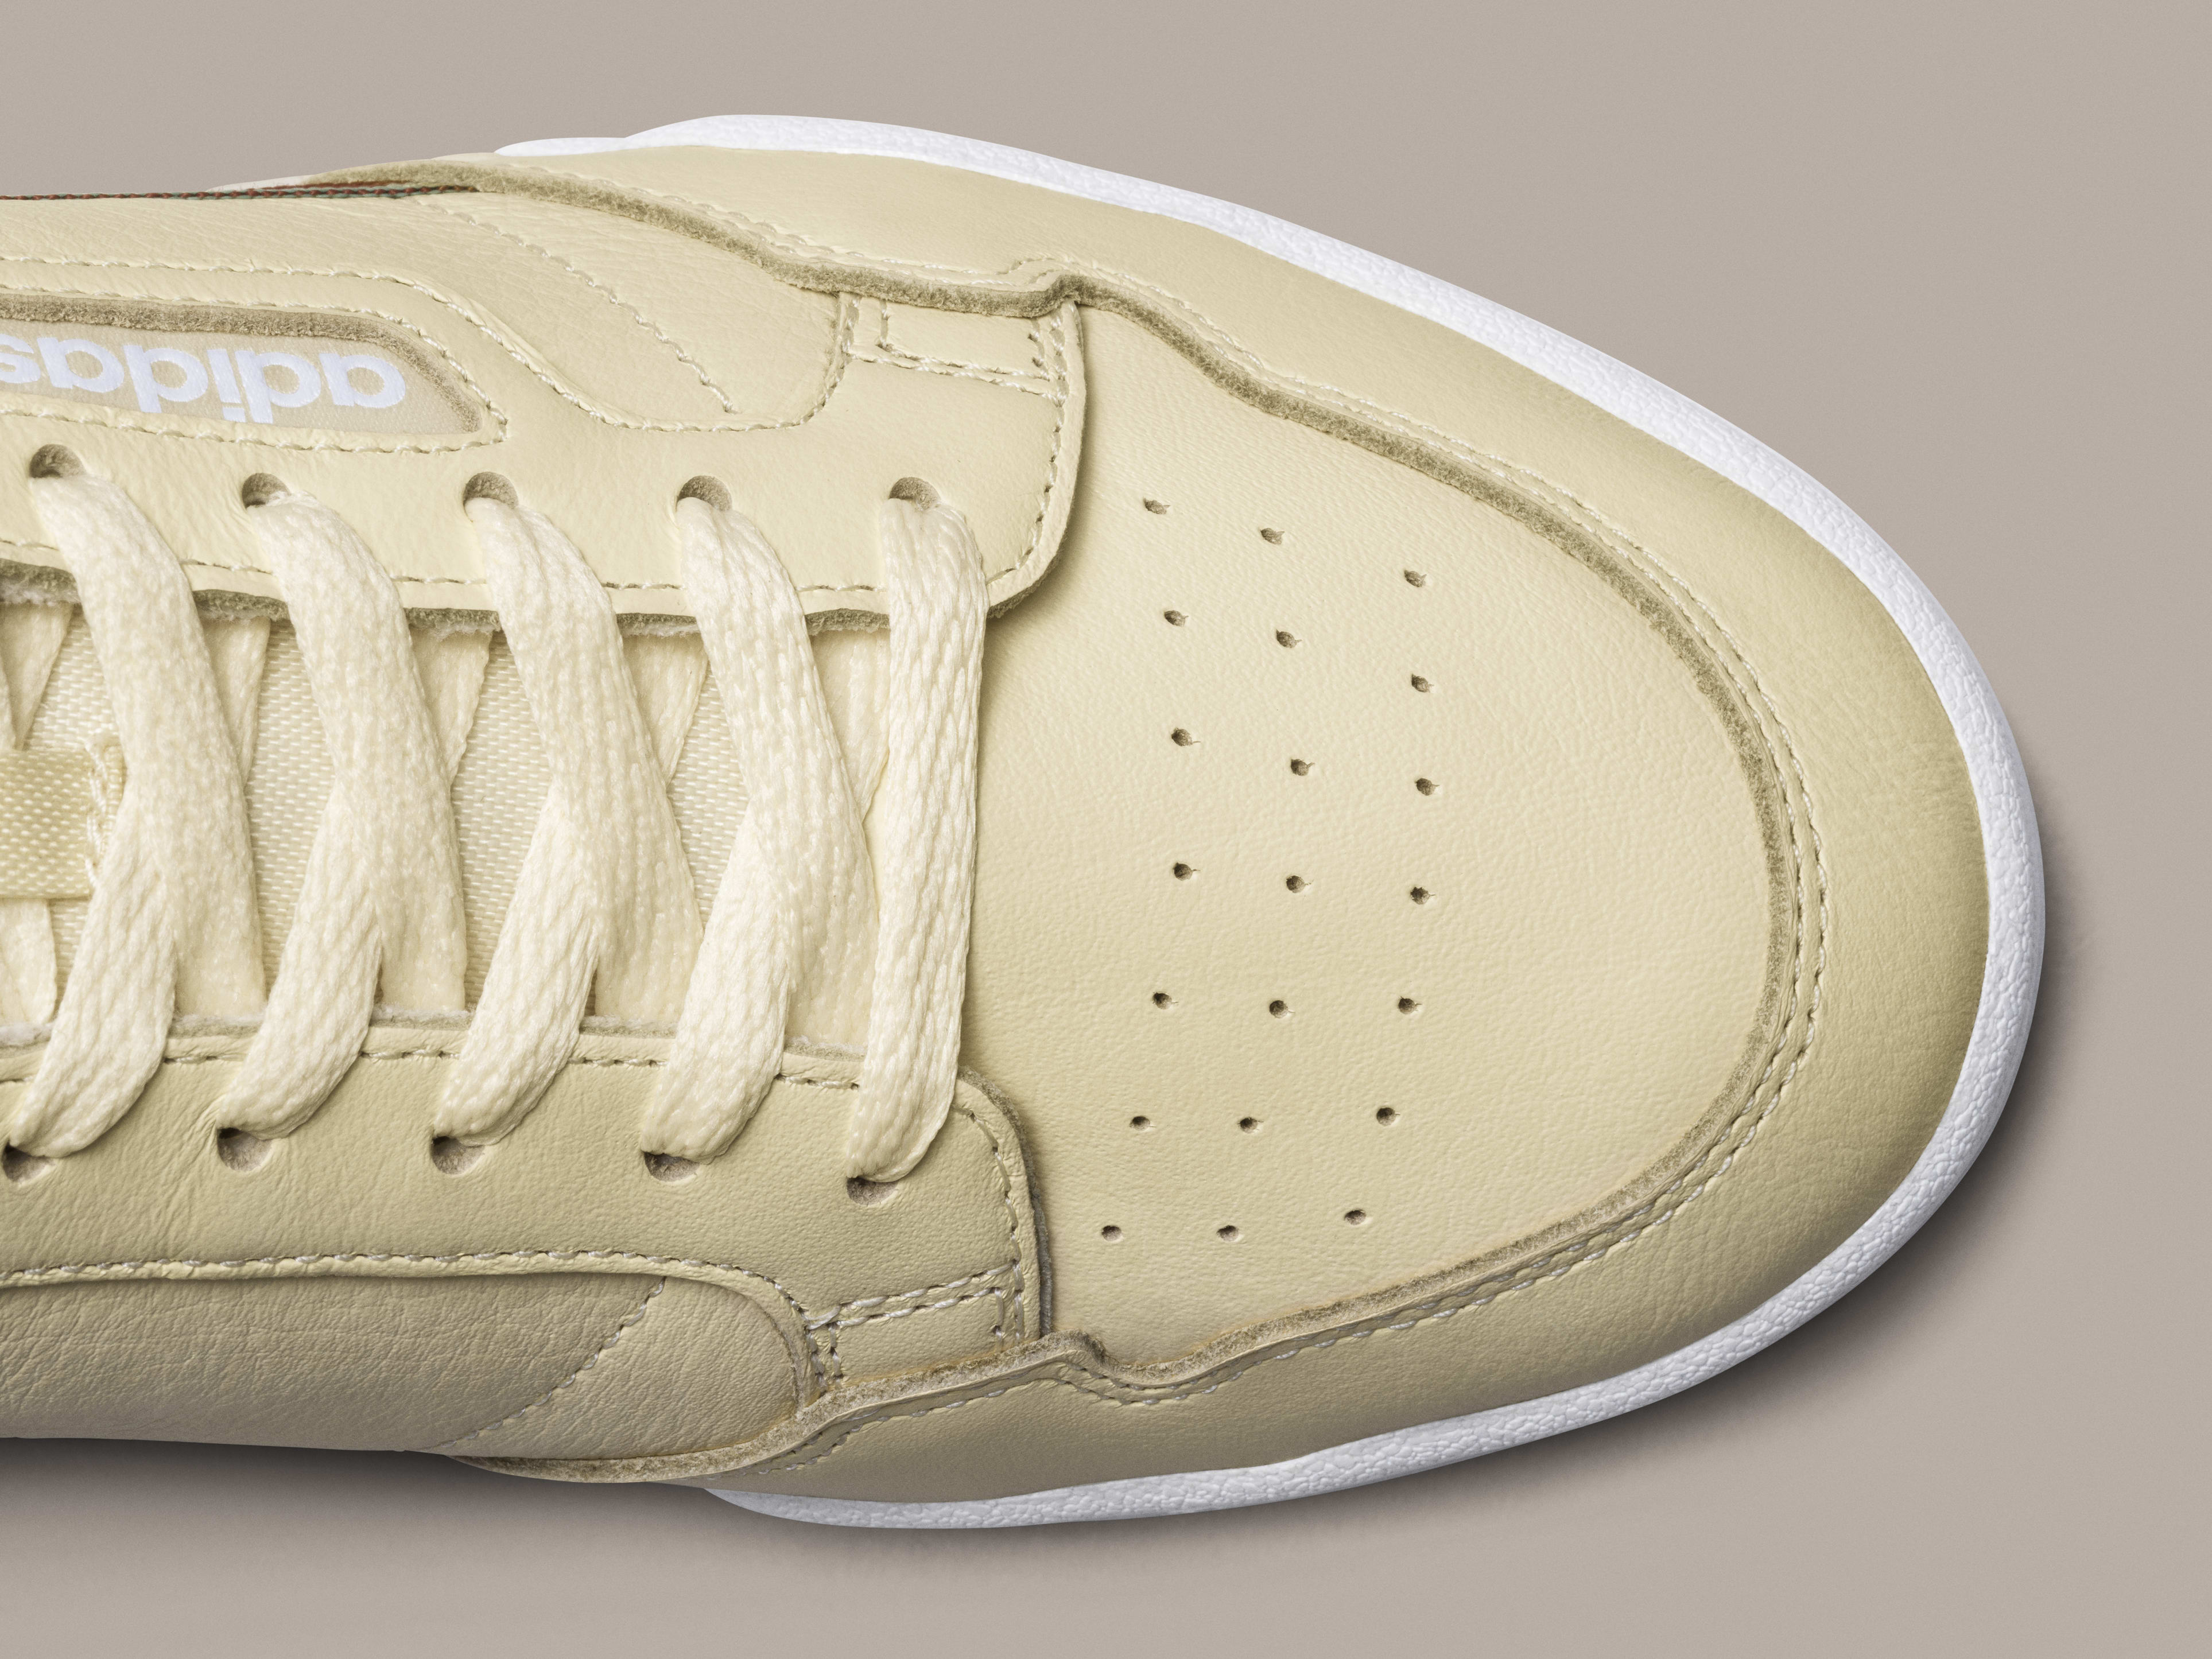 Adidas Continental 80 &#x27;Yellow&#x27; AQ1054 Release Date